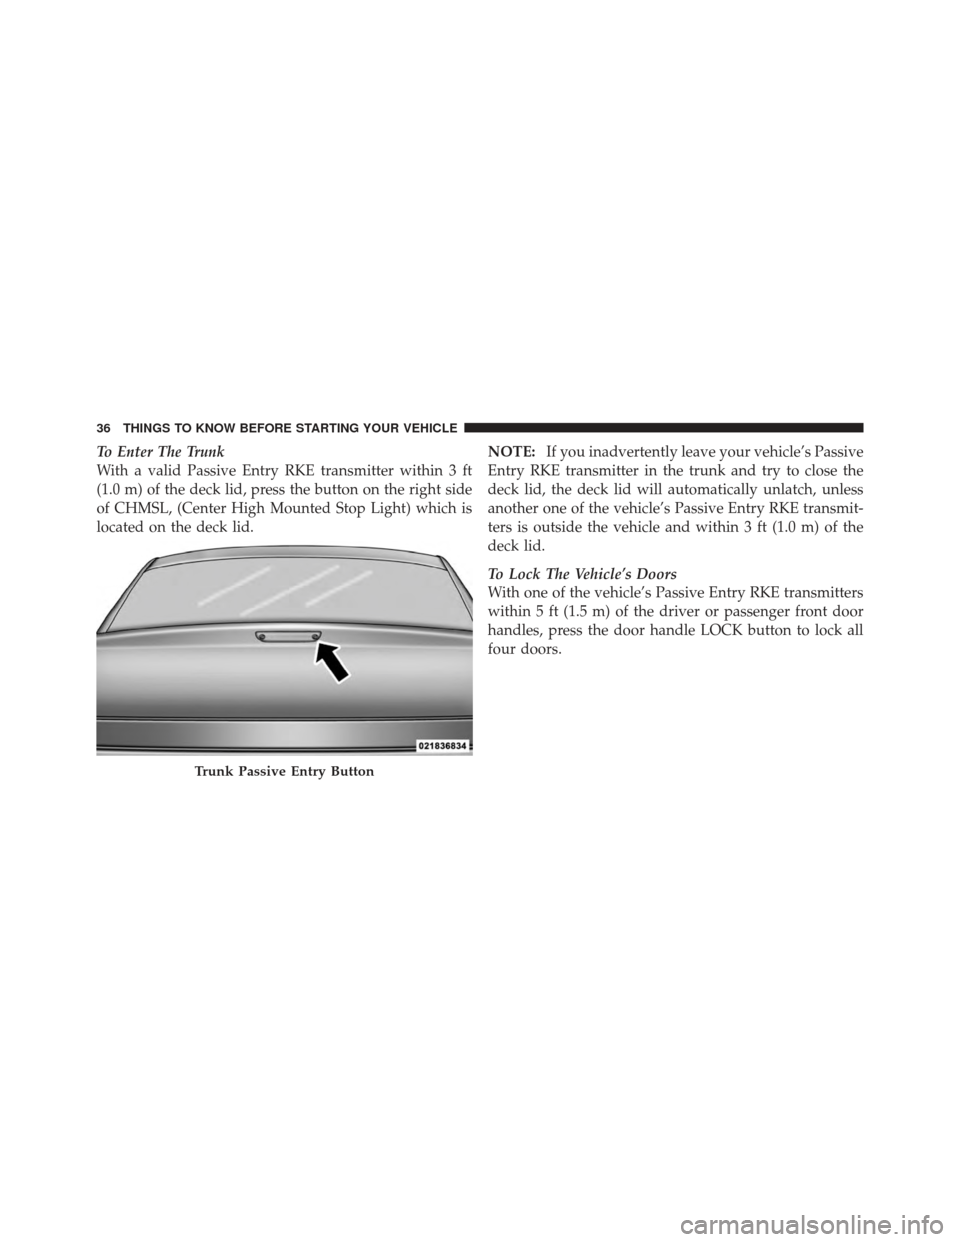 CHRYSLER 300 2011 2.G Owners Manual To Enter The Trunk
With a valid Passive Entry RKE transmitter within 3 ft
(1.0 m) of the deck lid, press the button on the right side
of CHMSL, (Center High Mounted Stop Light) which is
located on the